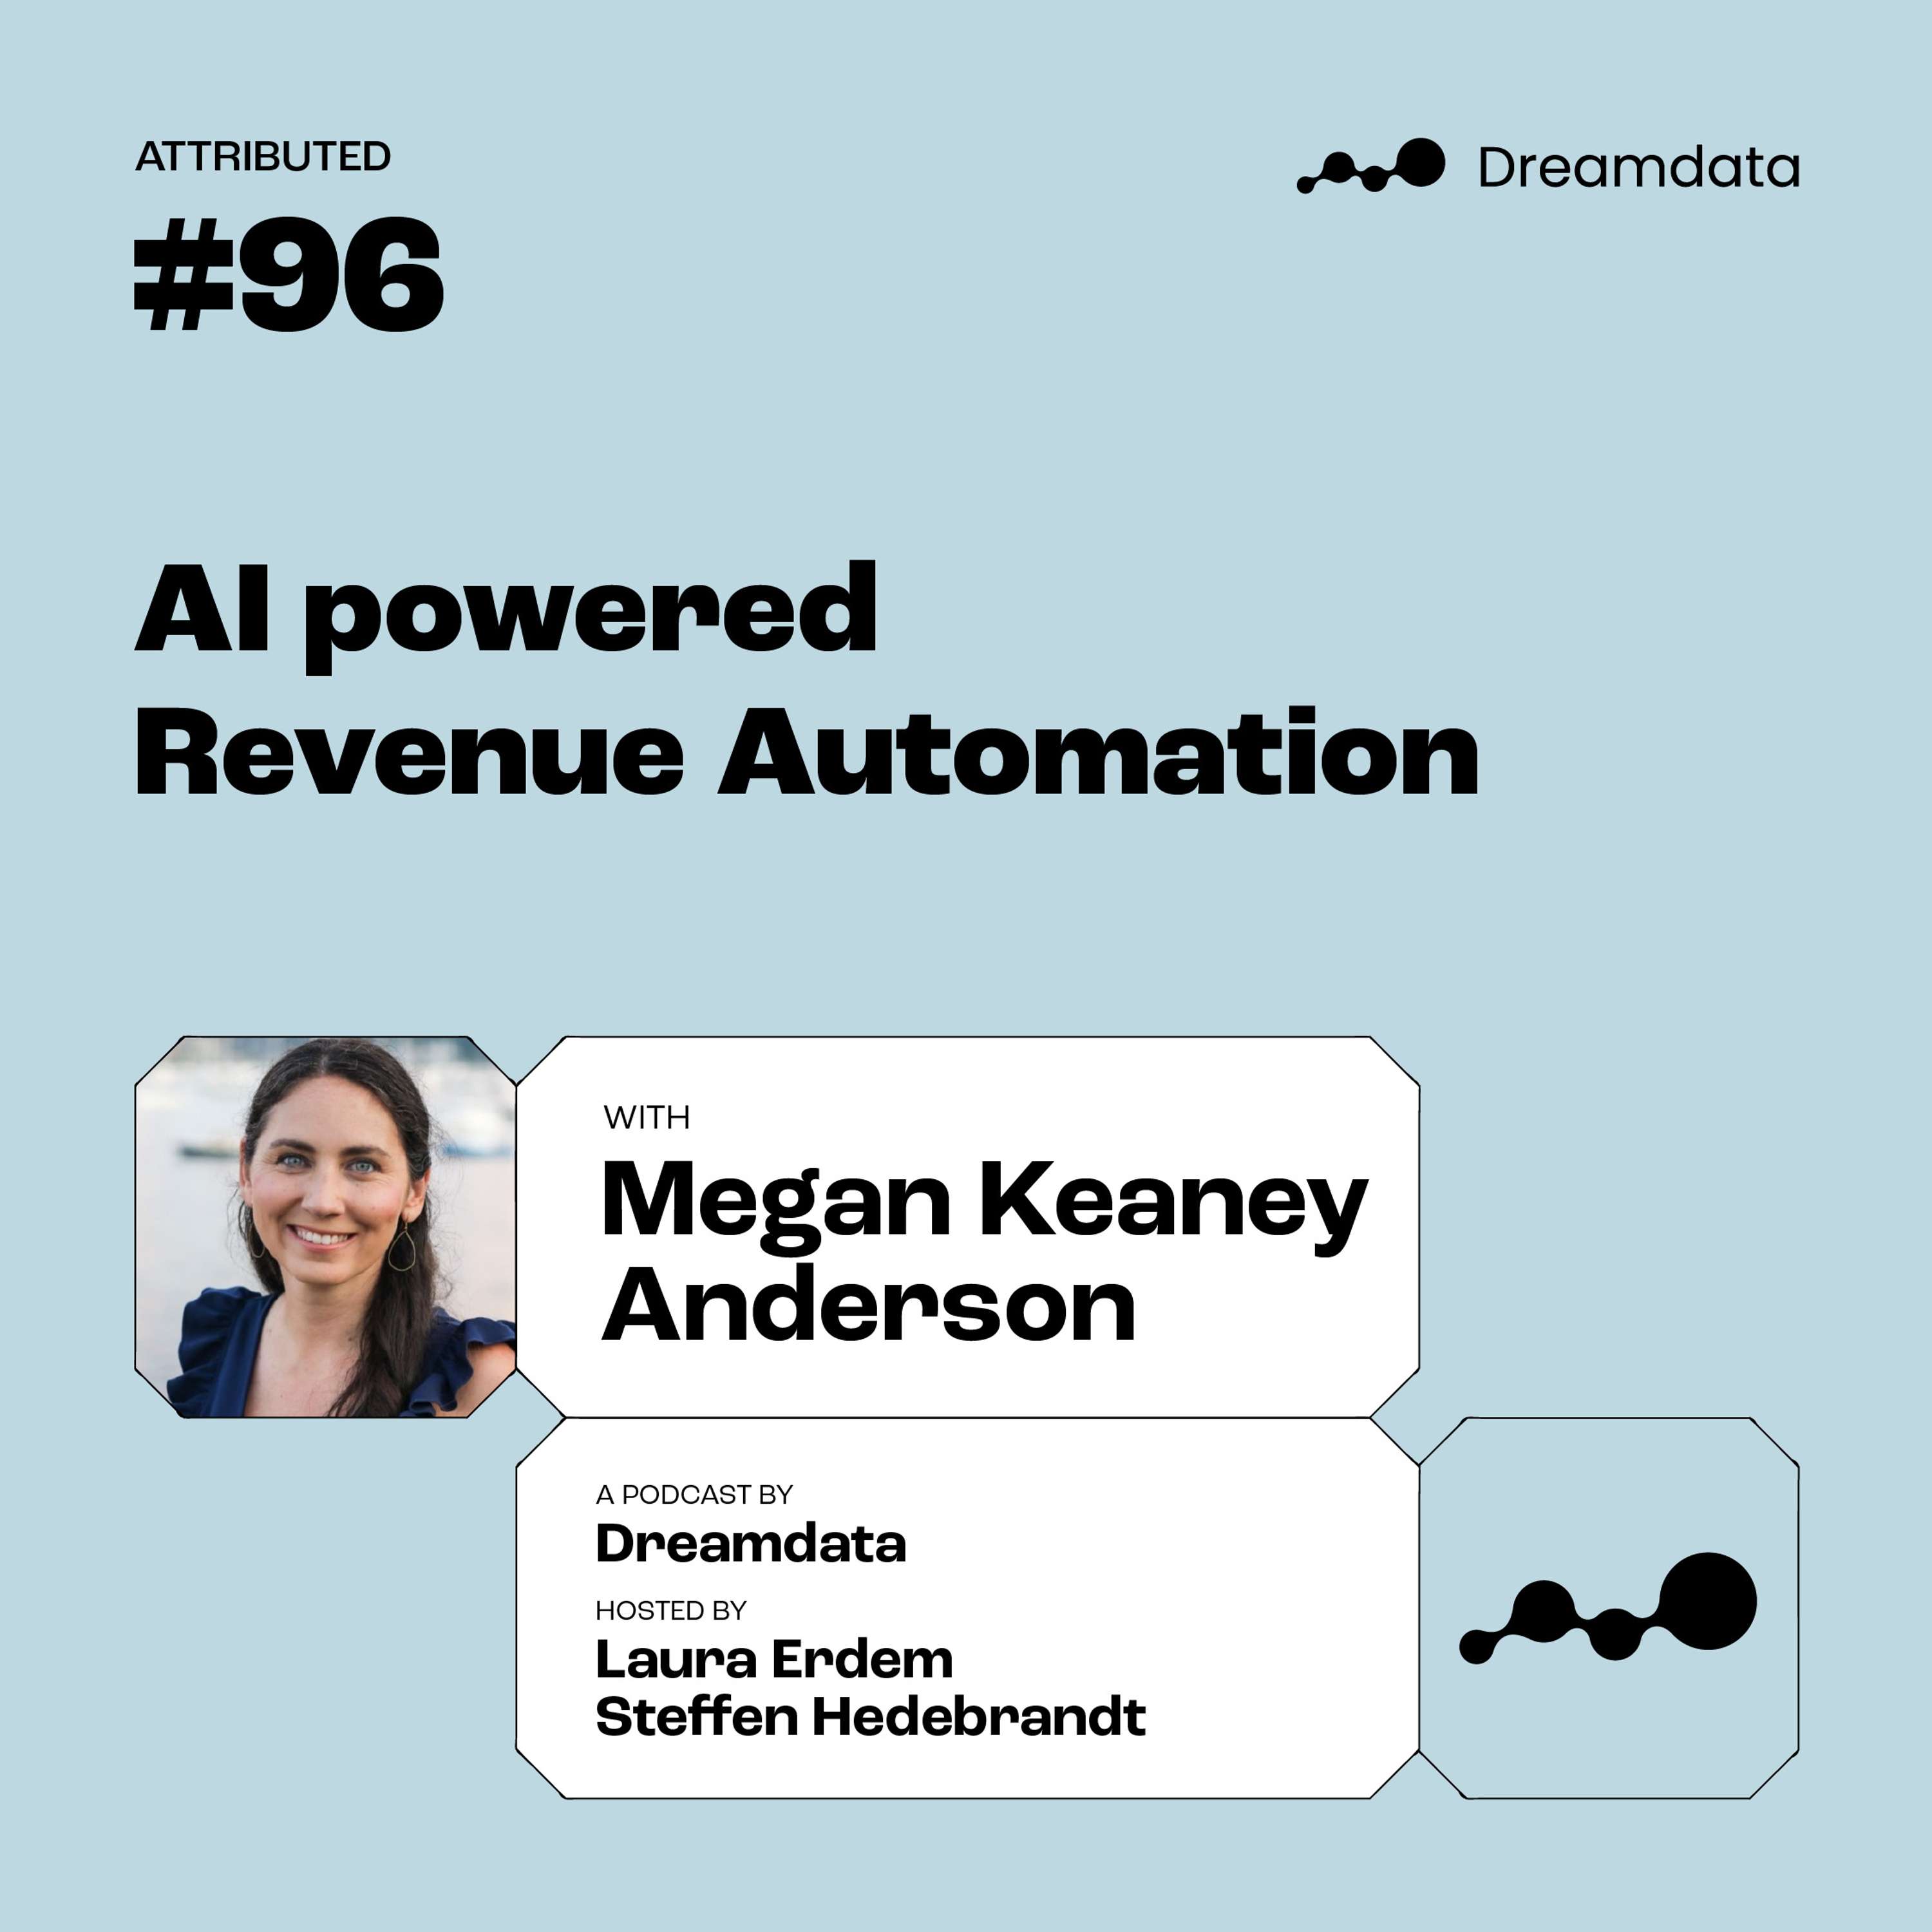 Meghan Keaney Anderson: AI powered Revenue Automation